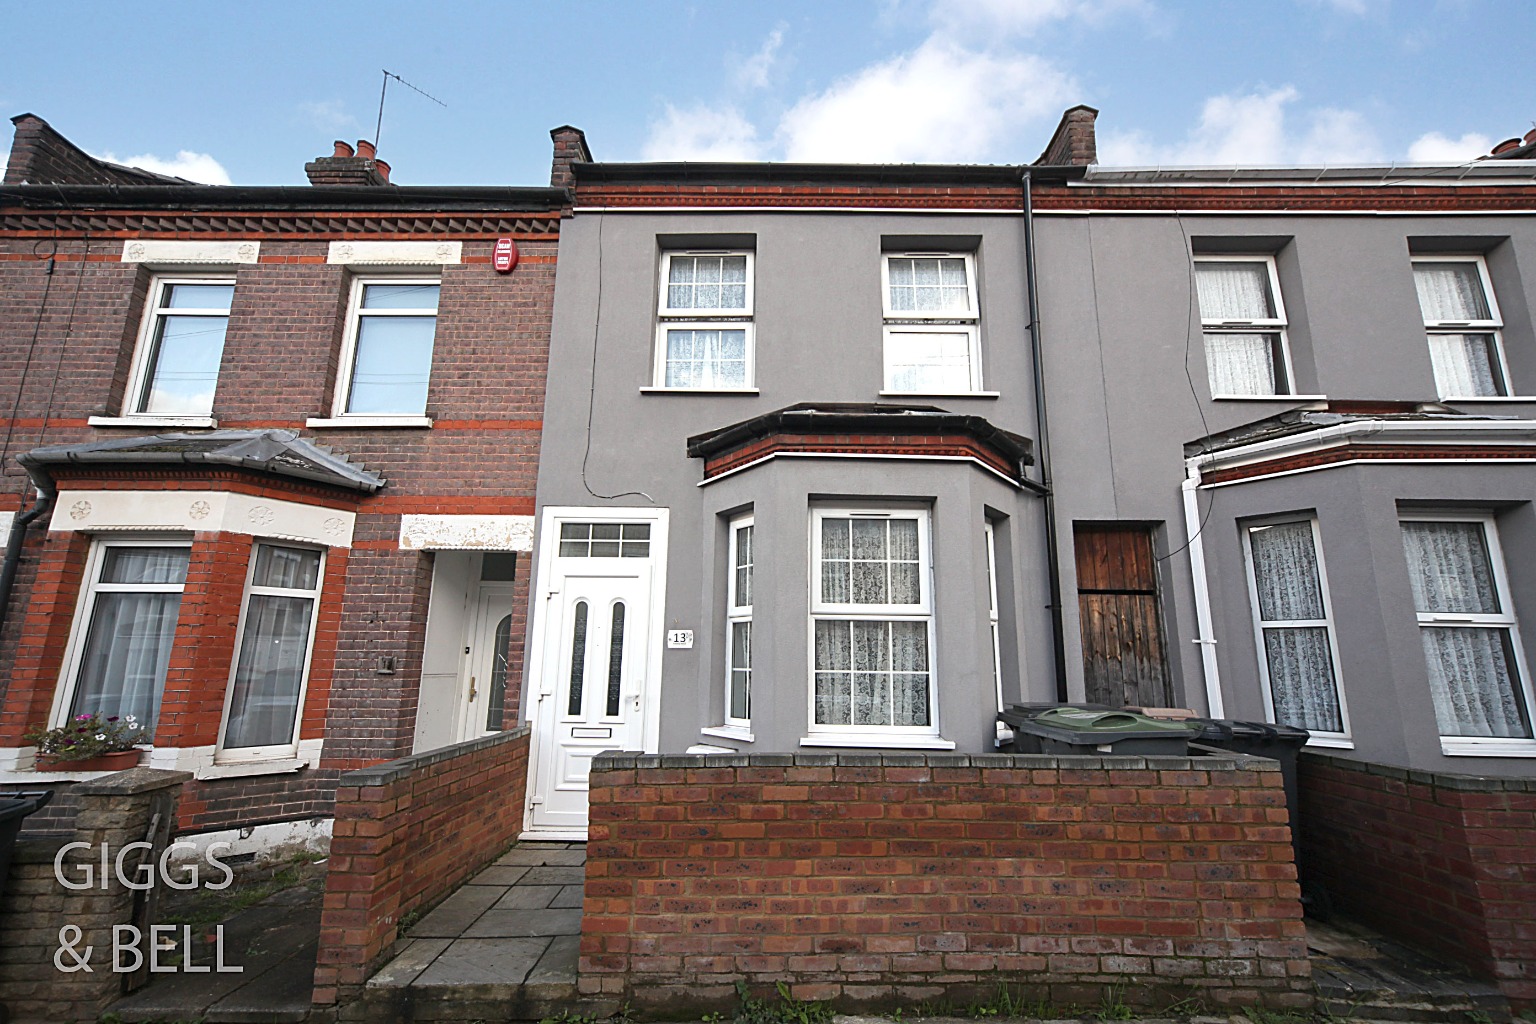 3 bed terraced house for sale in Naseby Road, Luton, LU1 